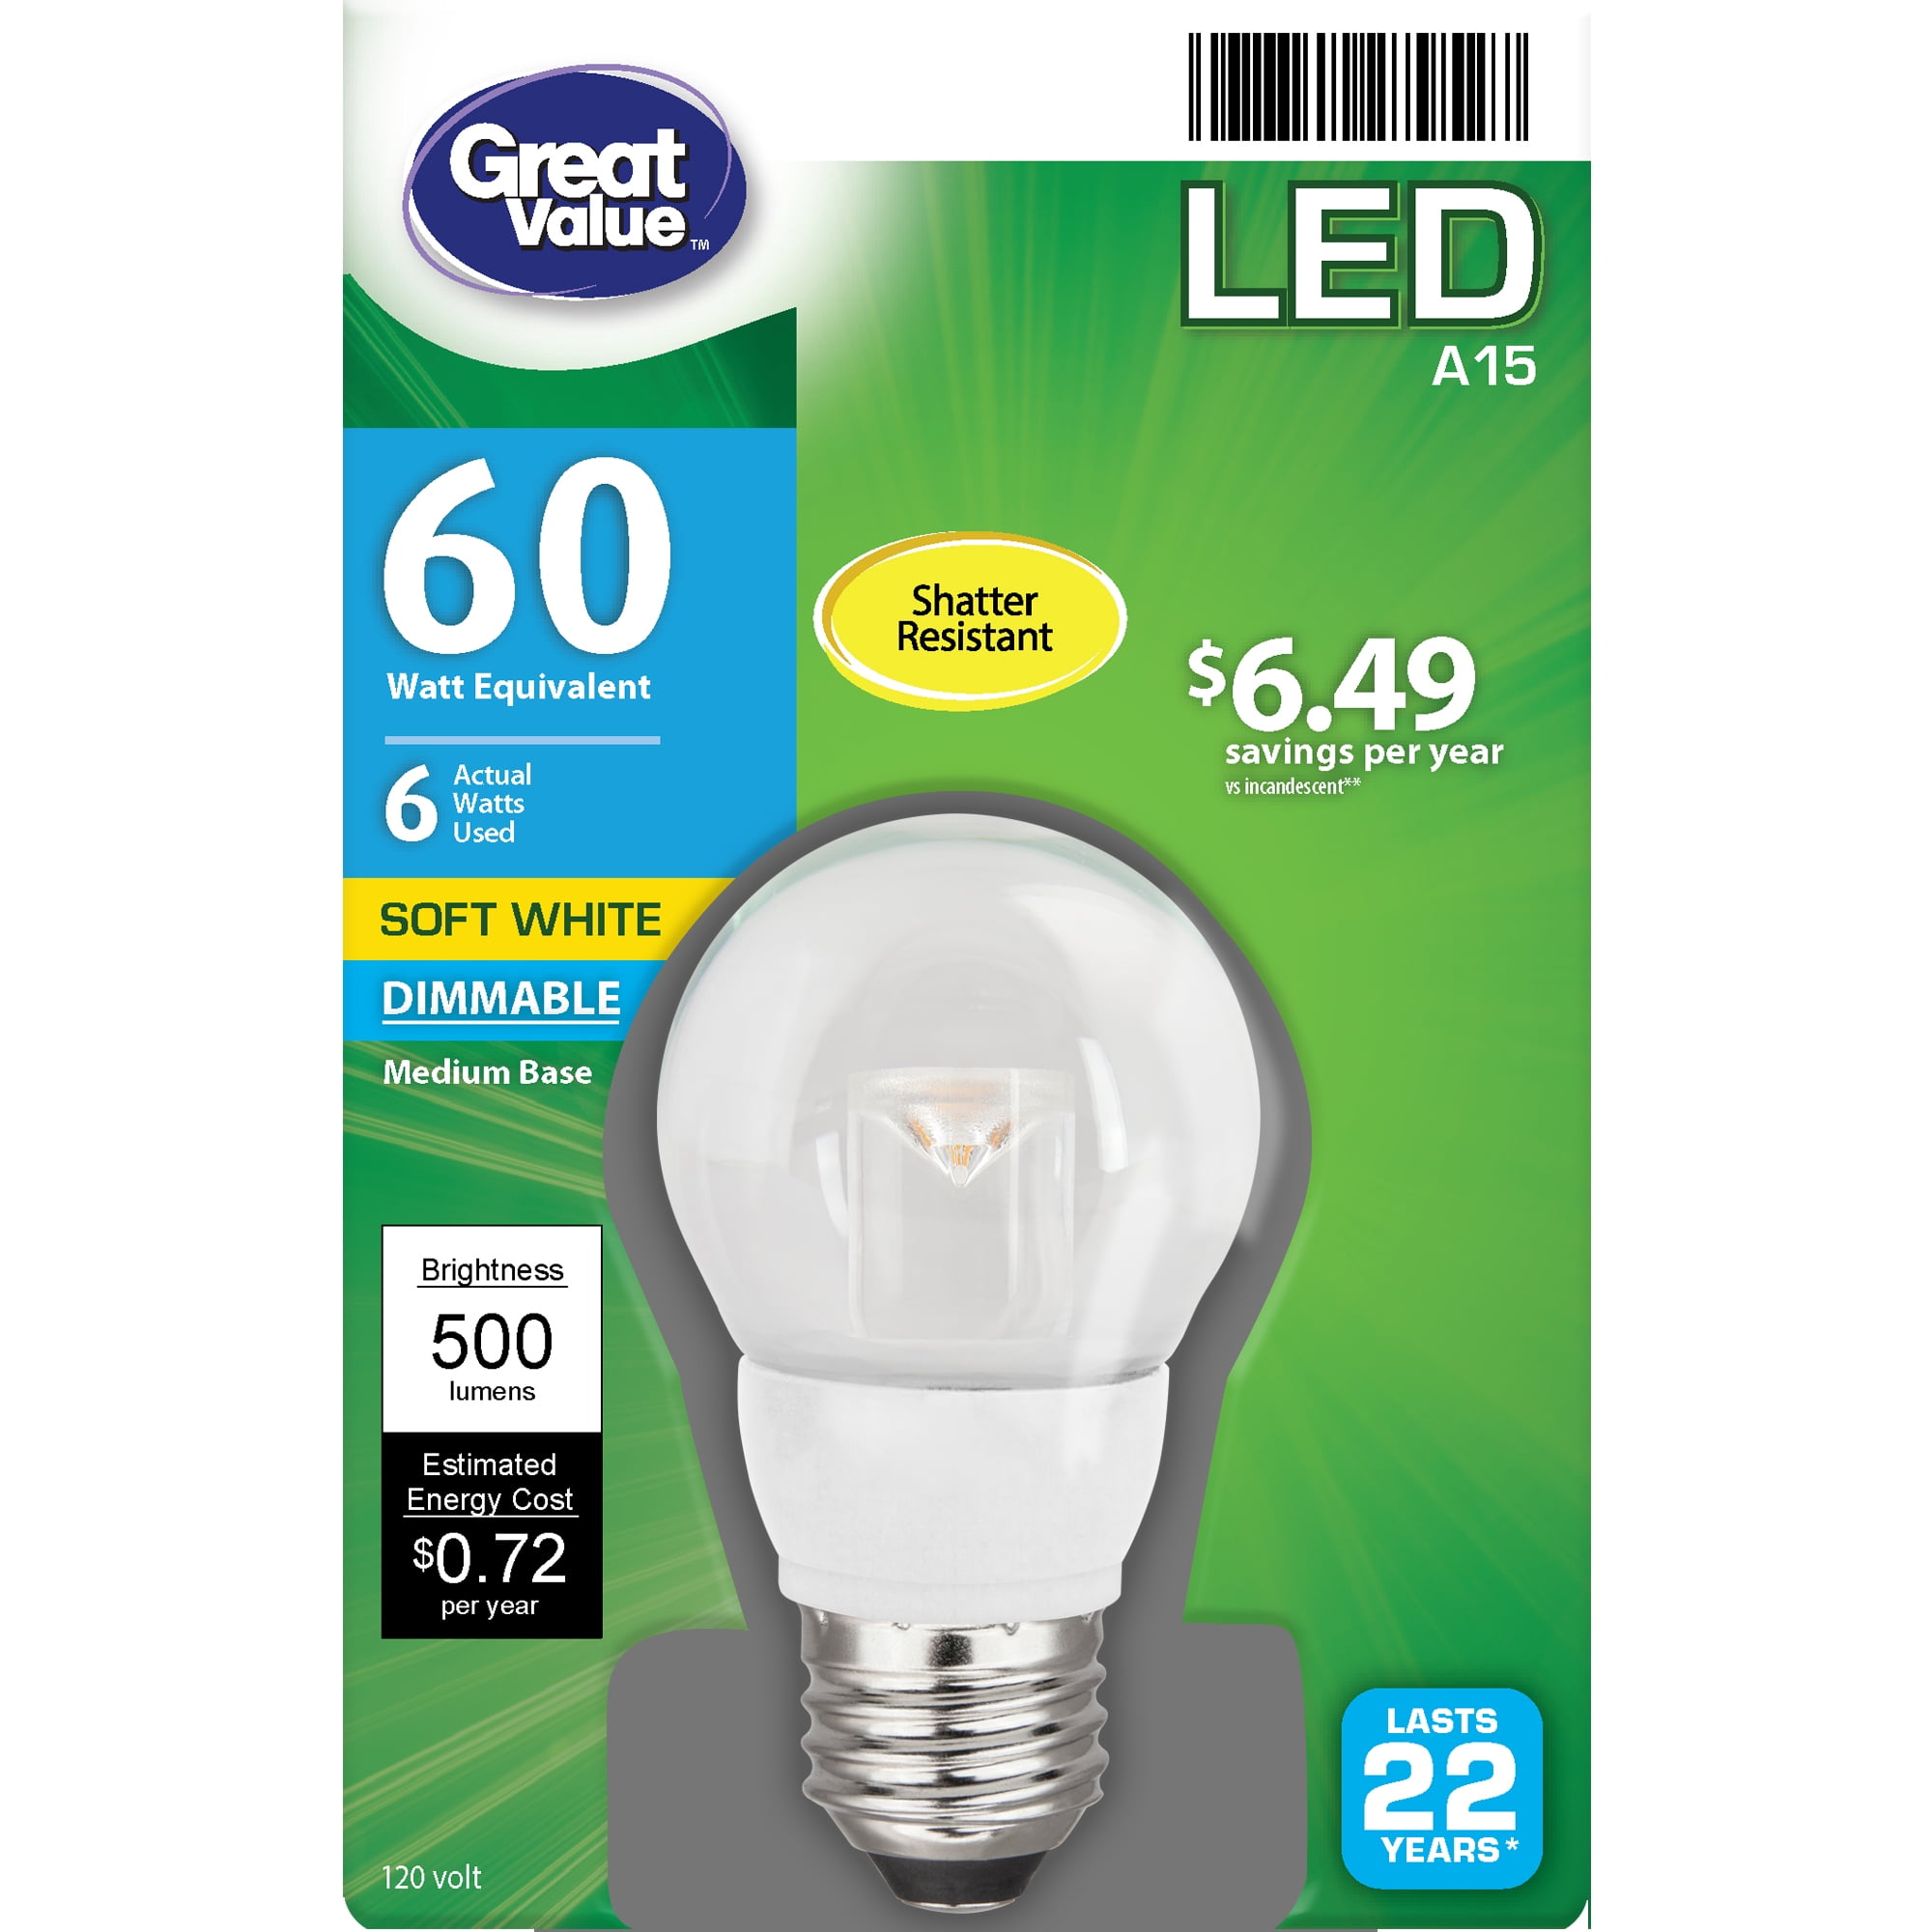 Great Value LED Bulb, 6W (60W Equivalent) A15 Ceiling Fan Clear E26 Medium Base, Dimmable, White, 1-Pack - Walmart.com